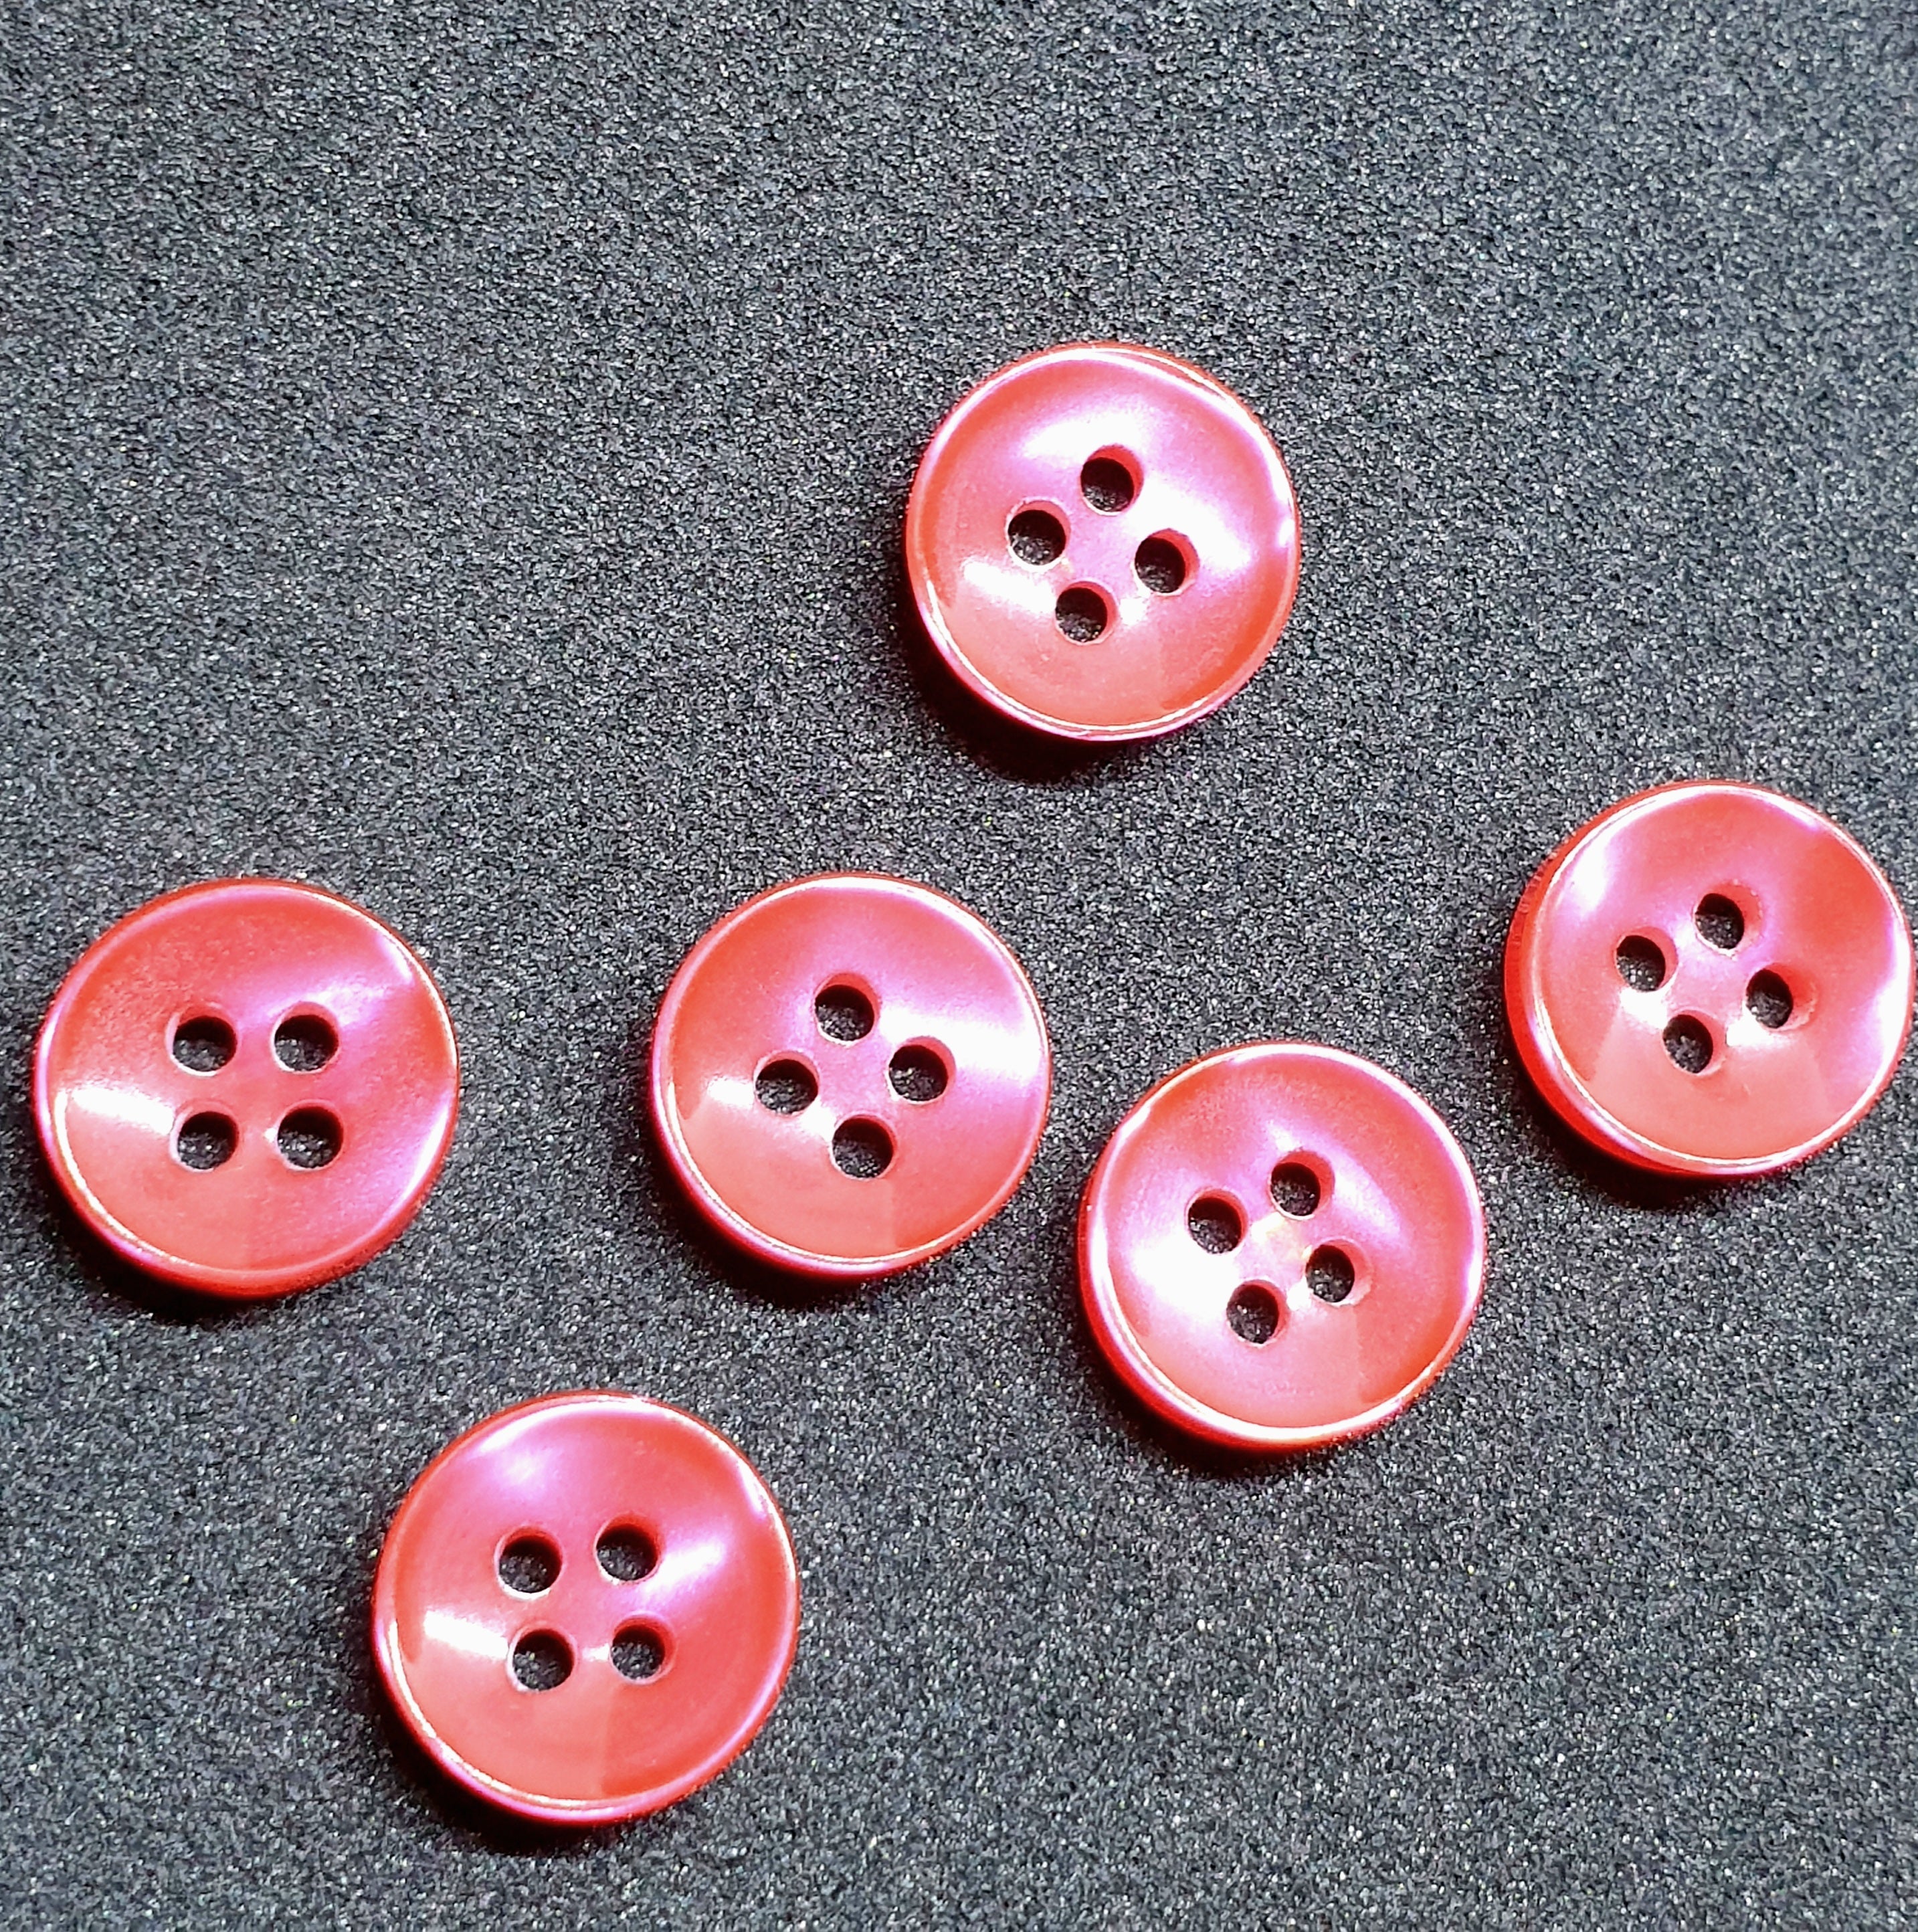 MajorCrafts 80pcs 11.5mm Rose Red Pearlescent 4 Holes High-Grade Round Resin Small Sewing Buttons